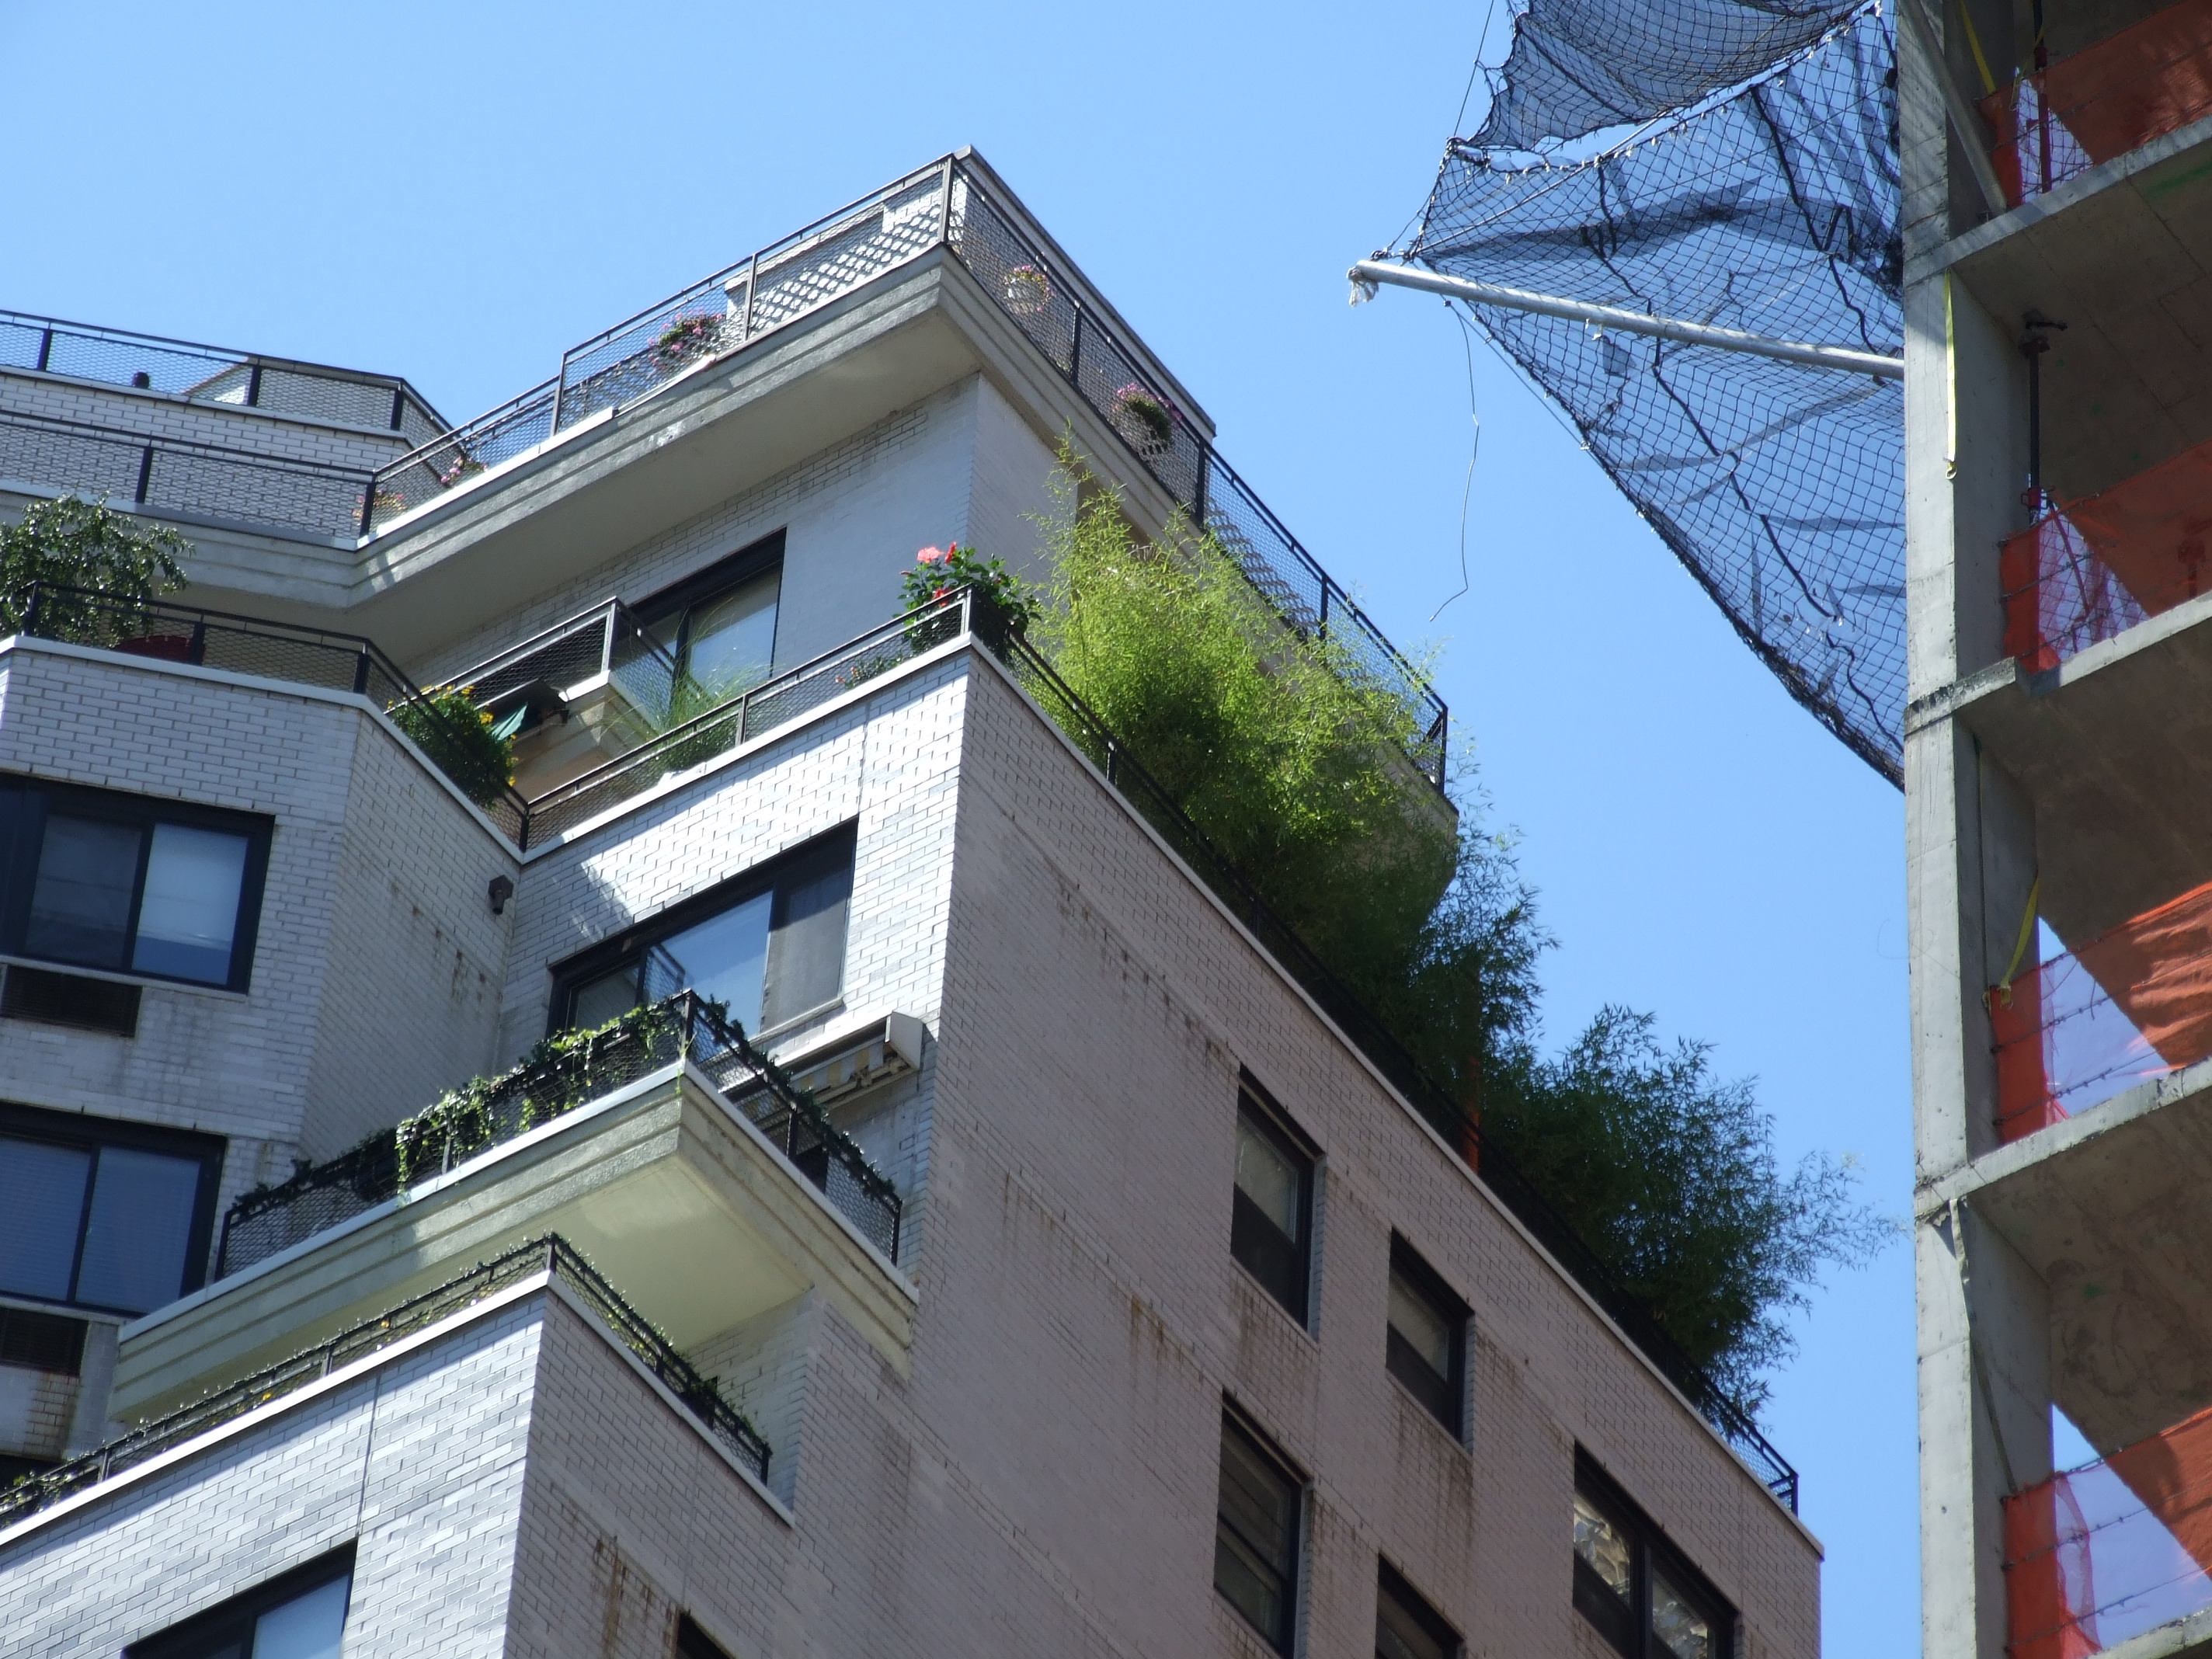 Plants in a balcony of a tall building